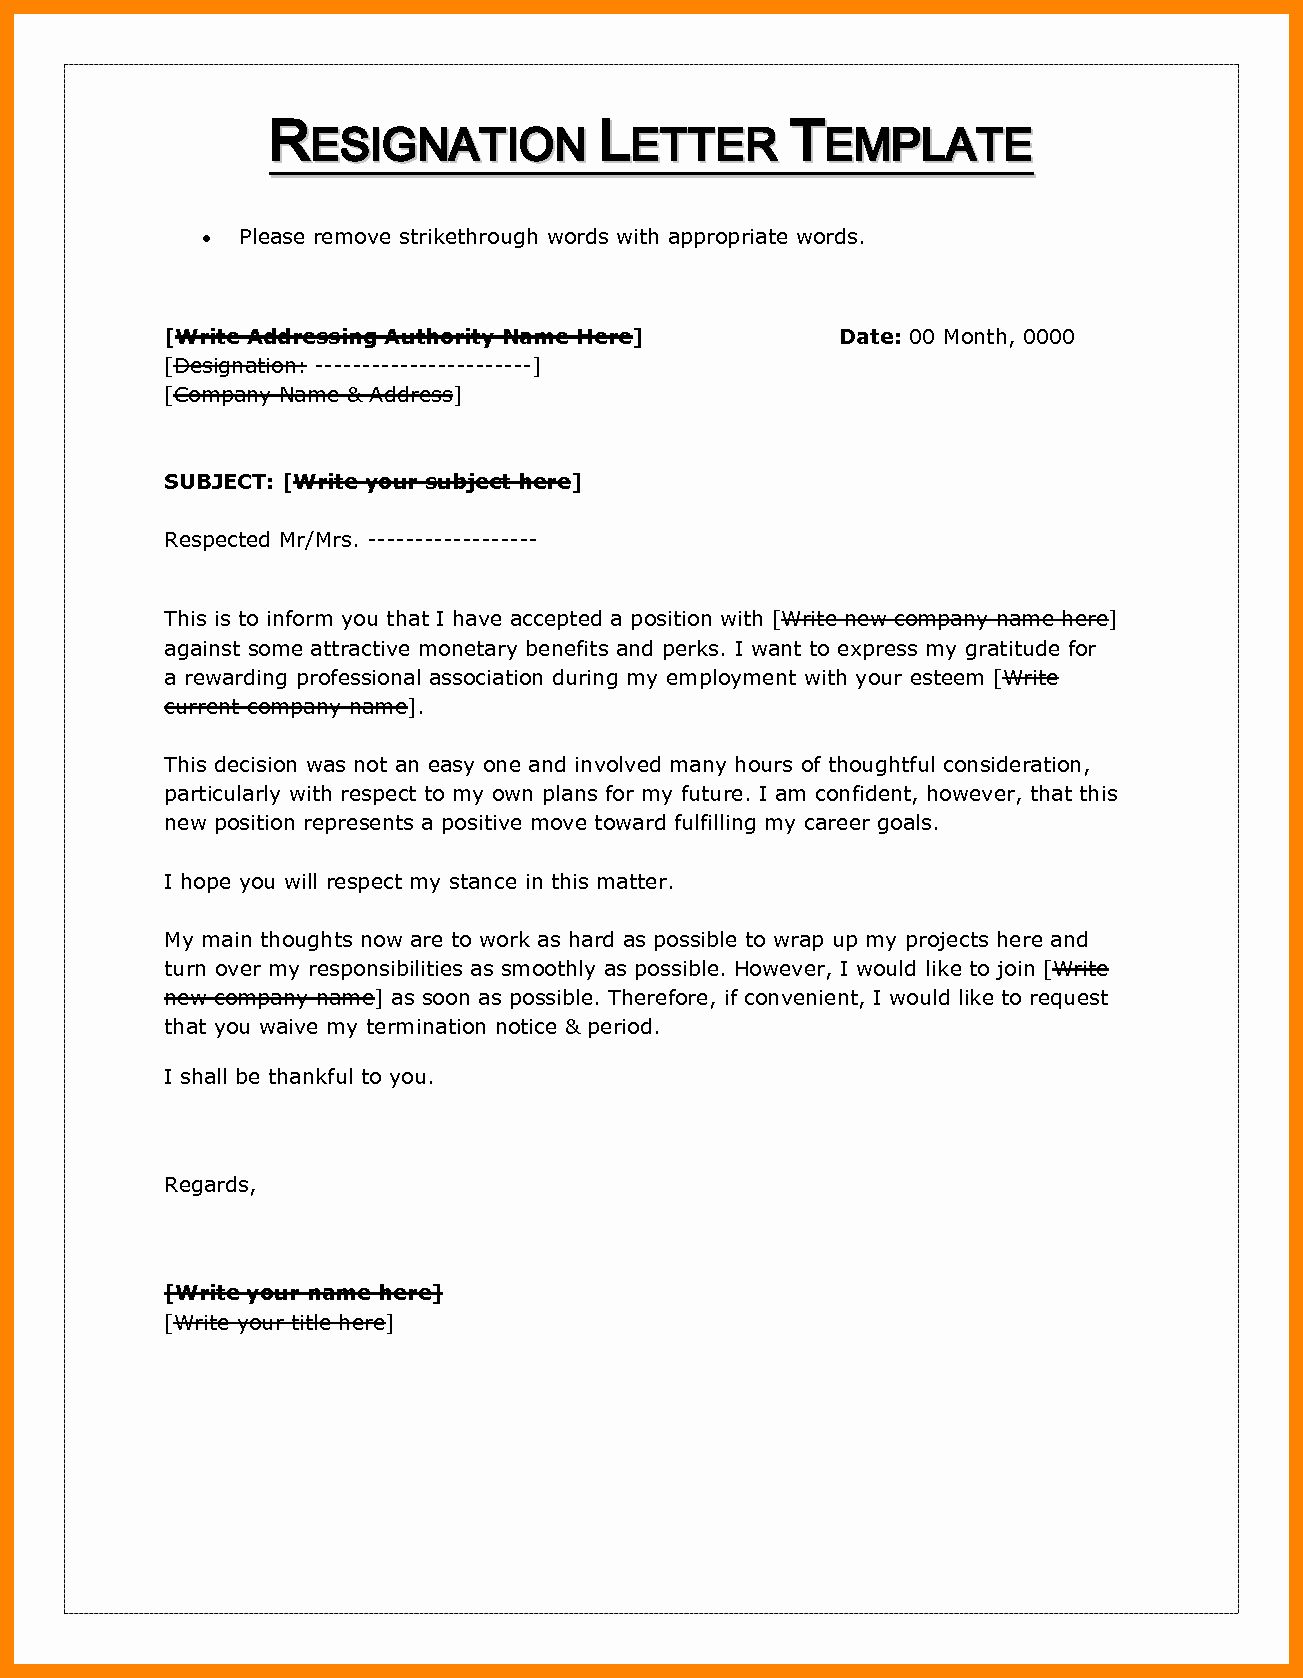 Letter Of Resignation Template Microsoft Inspirational 10 Letter Of Resignation Word Template Letter Template Word Letter Templates Business Letter Format